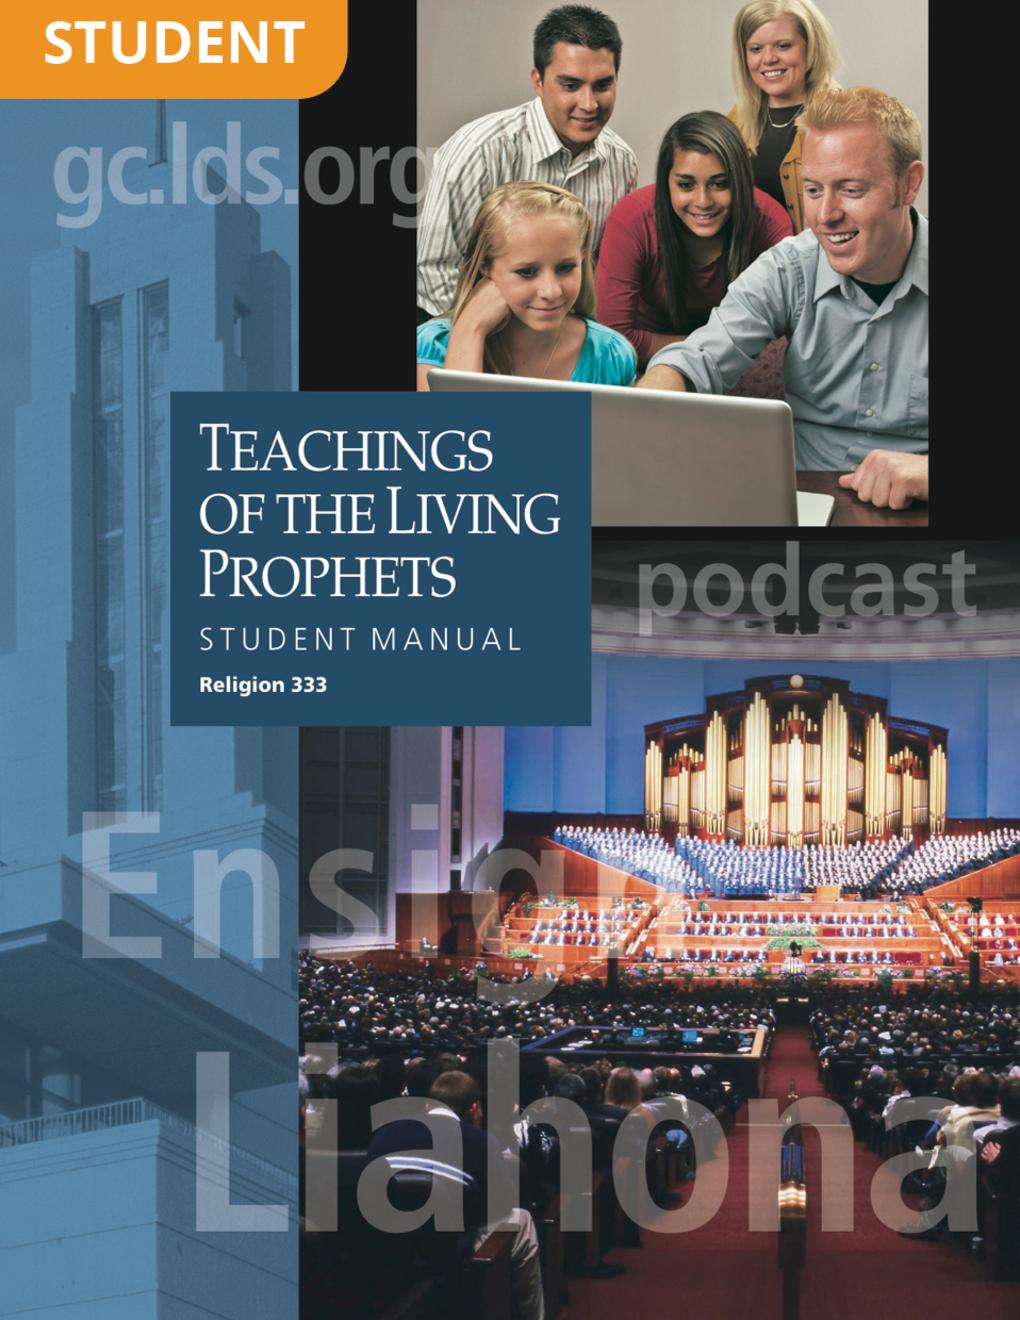 Teachings of the Living Prophets Student Manual (Rel 333)